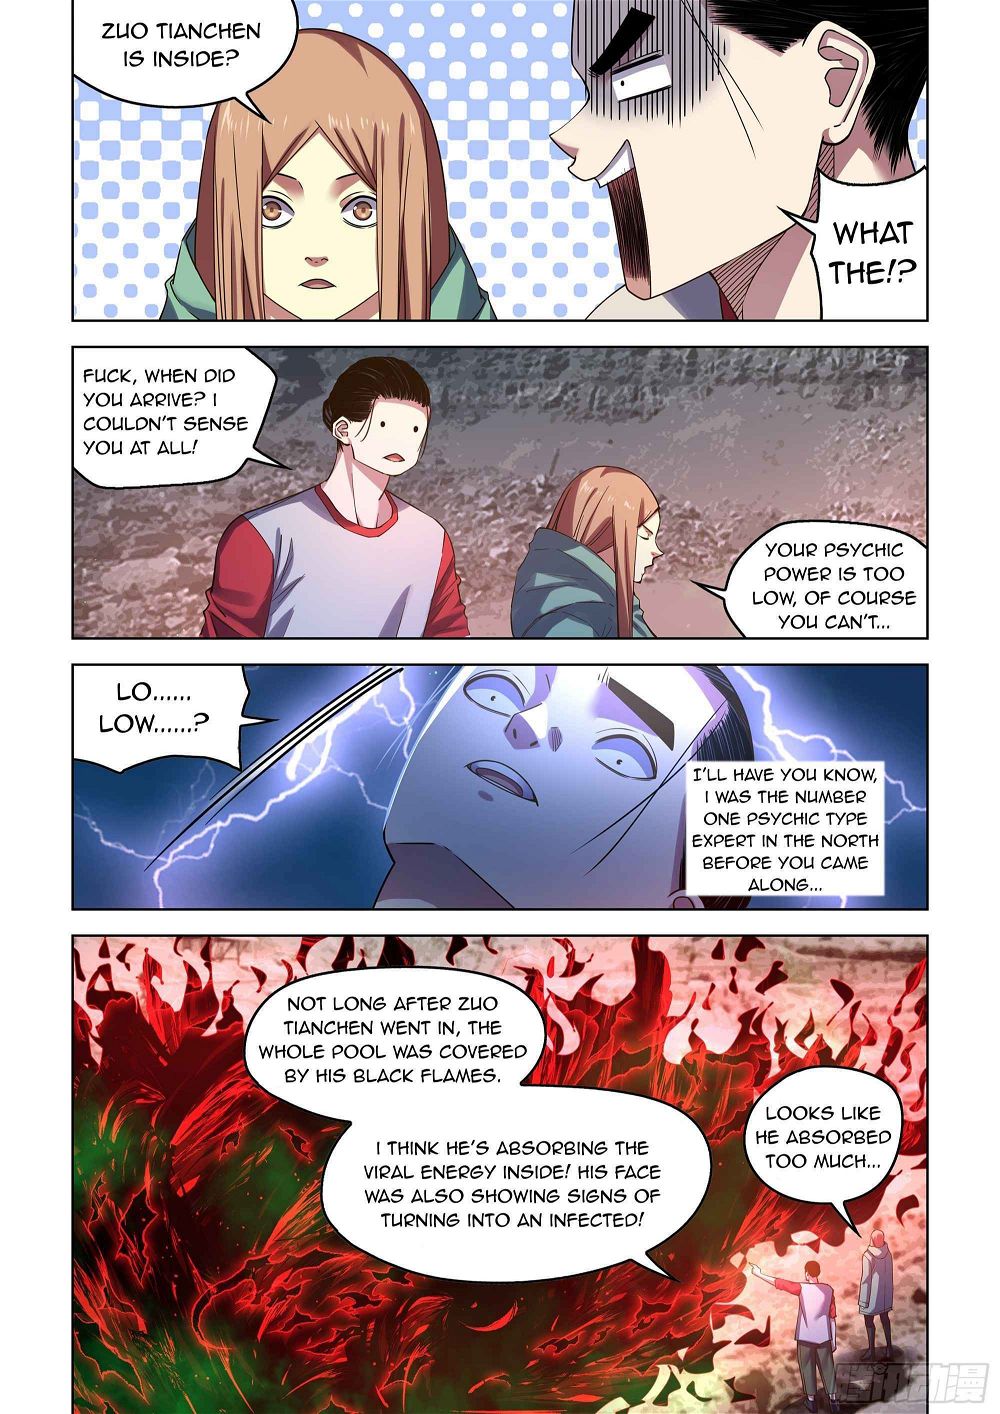 The Last Human Chapter 525 - Page 3